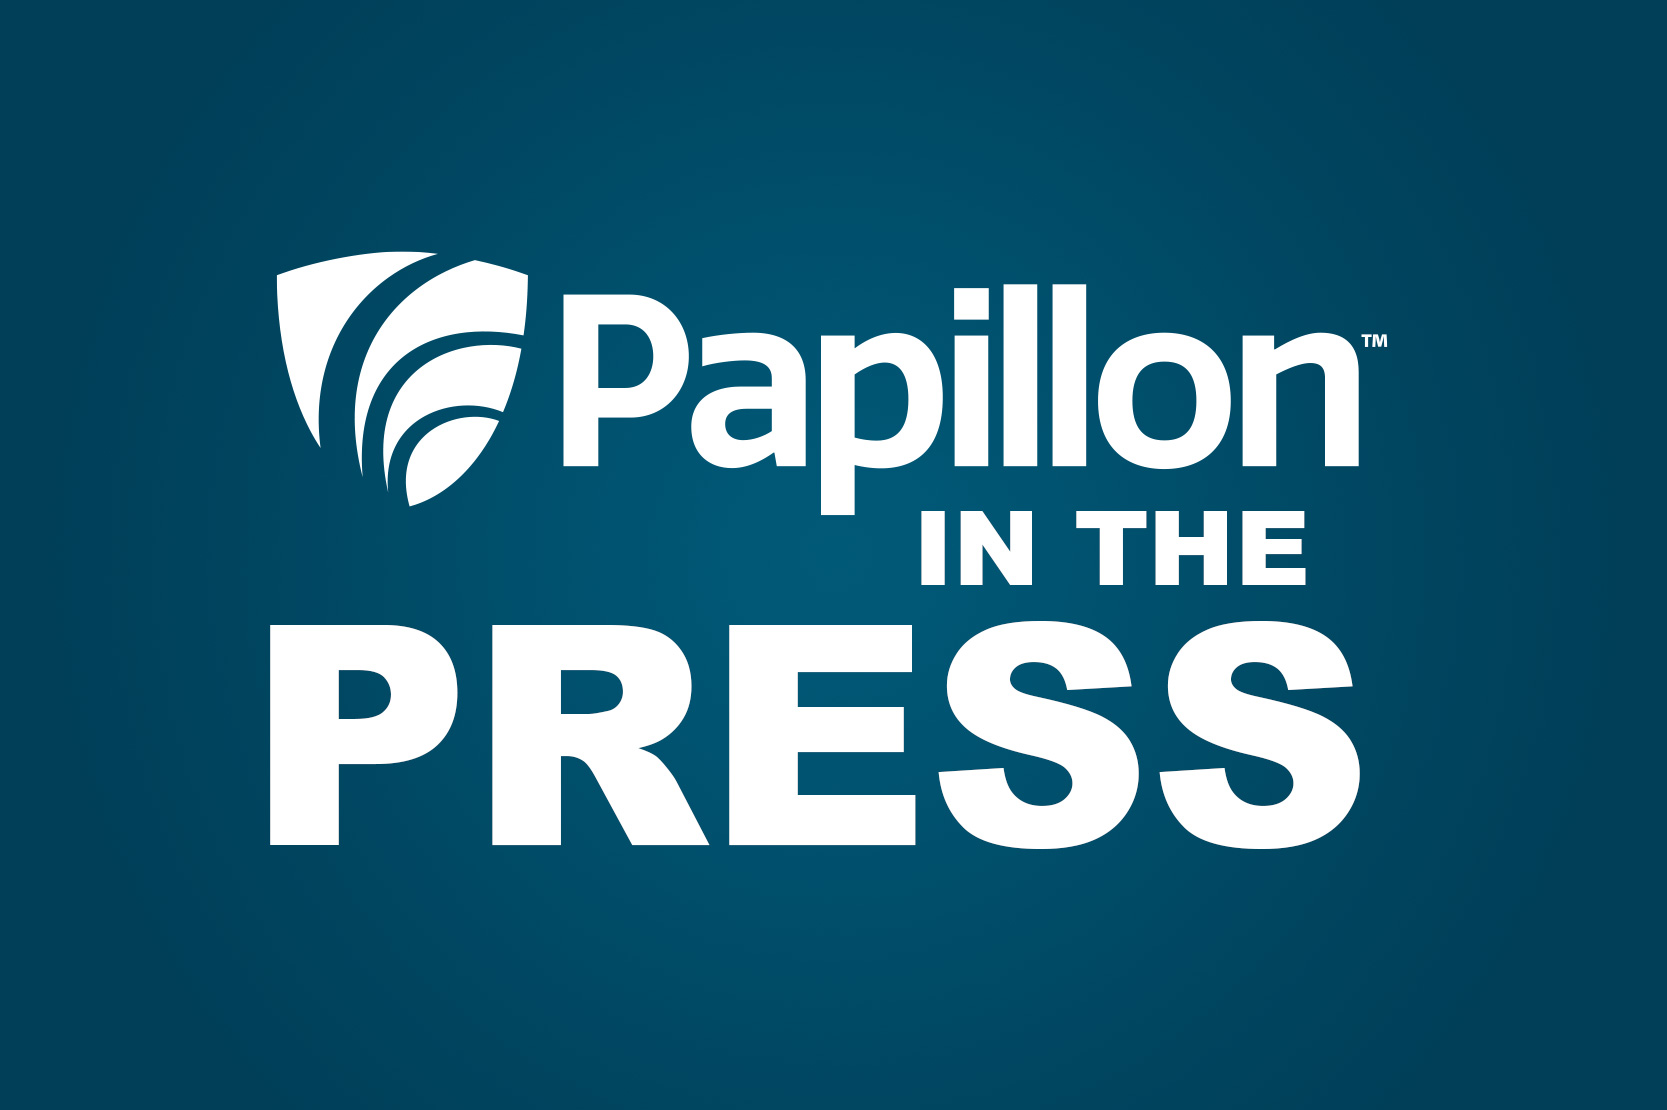 Papillion in the Press